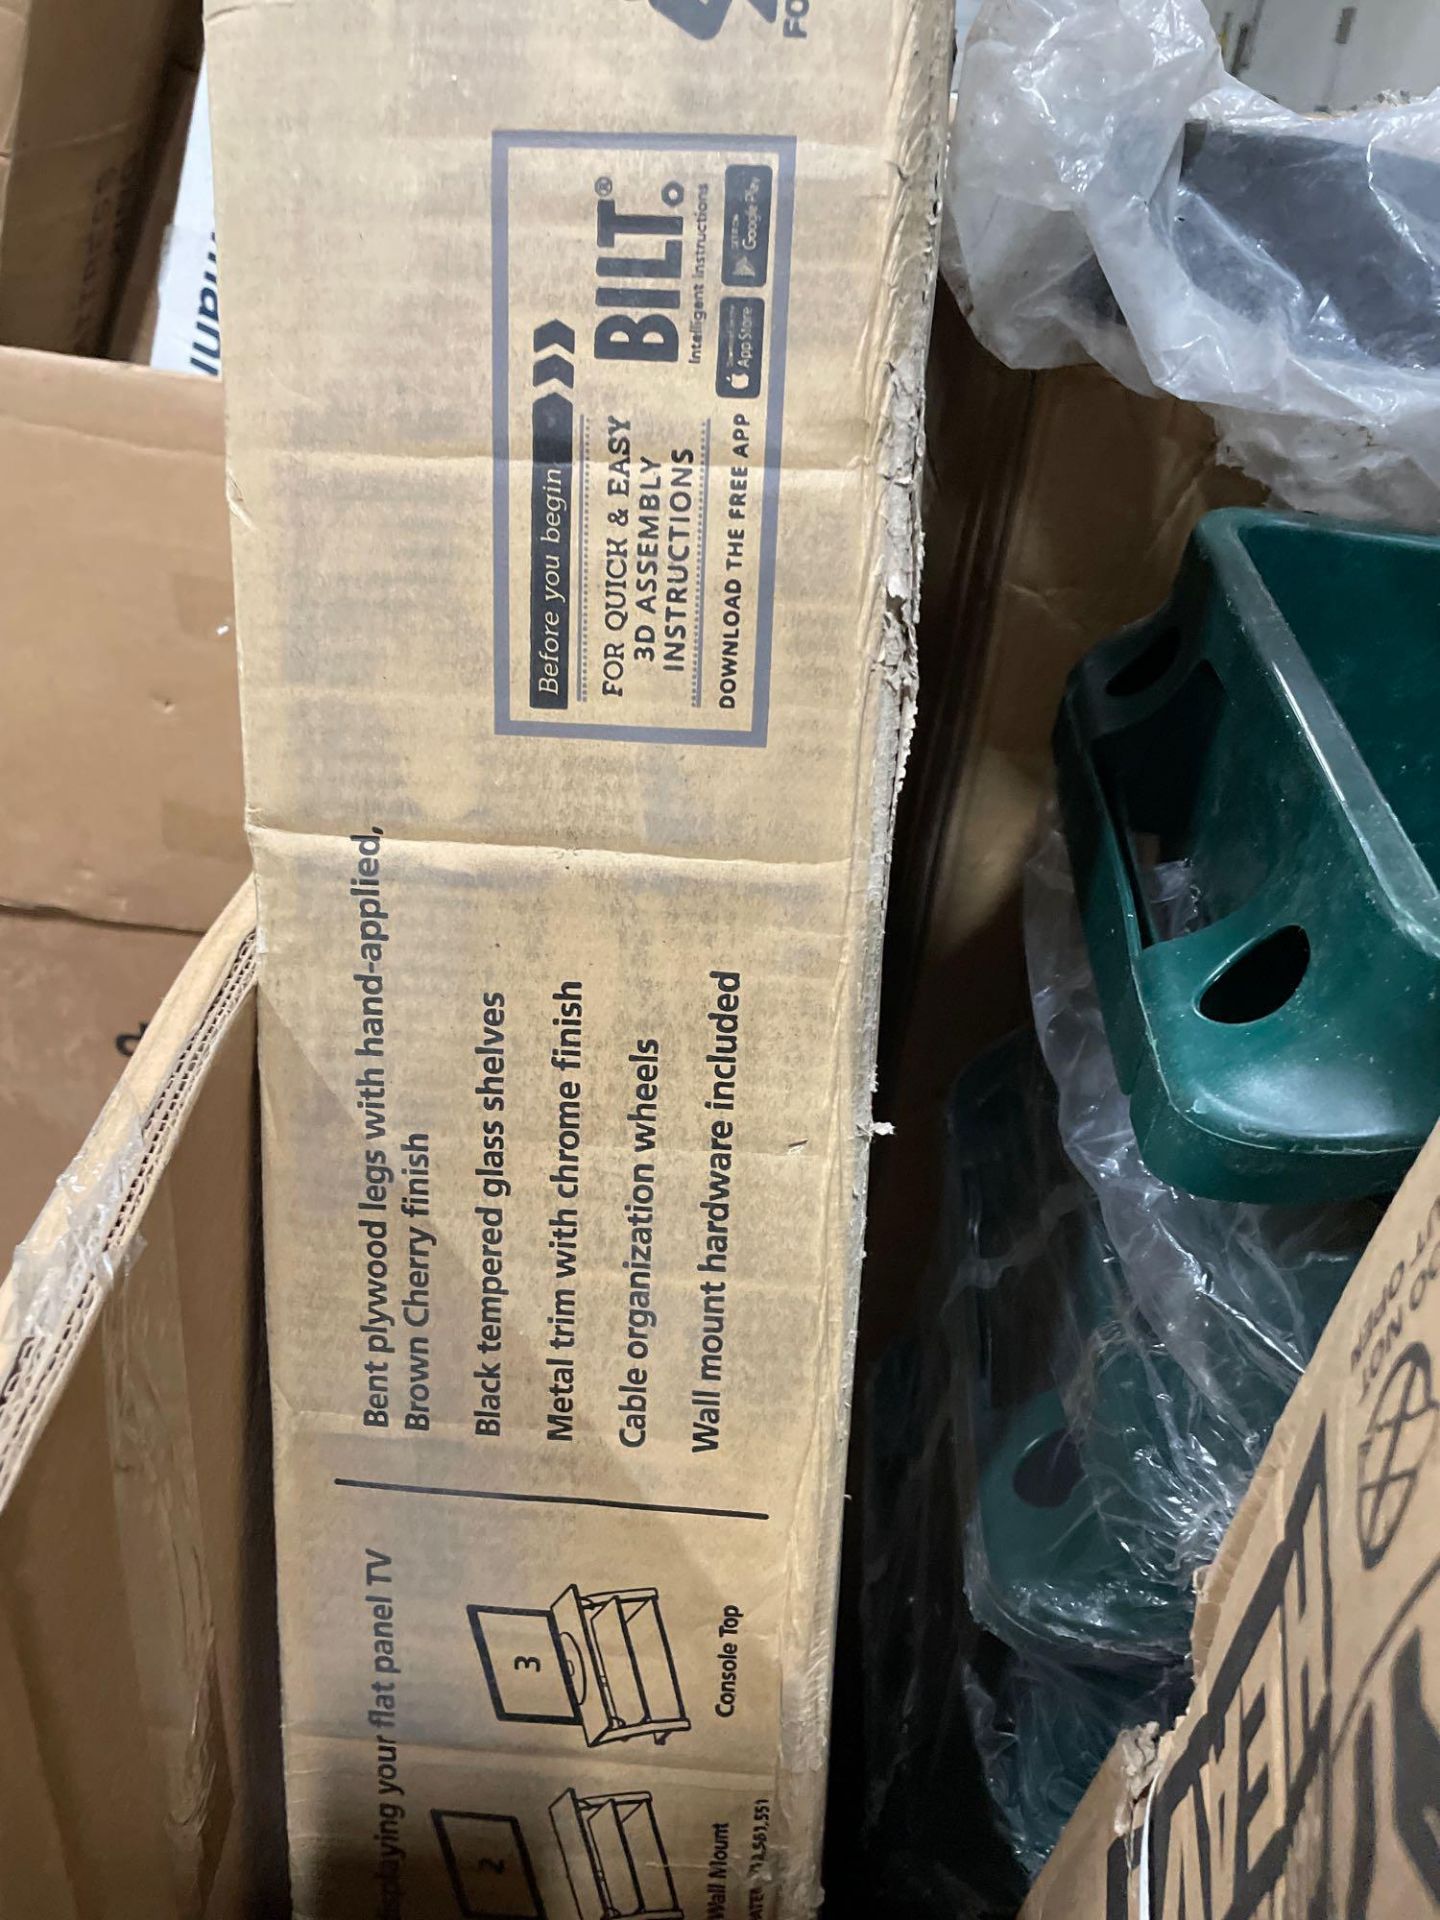 Two Pallets - Image 11 of 14